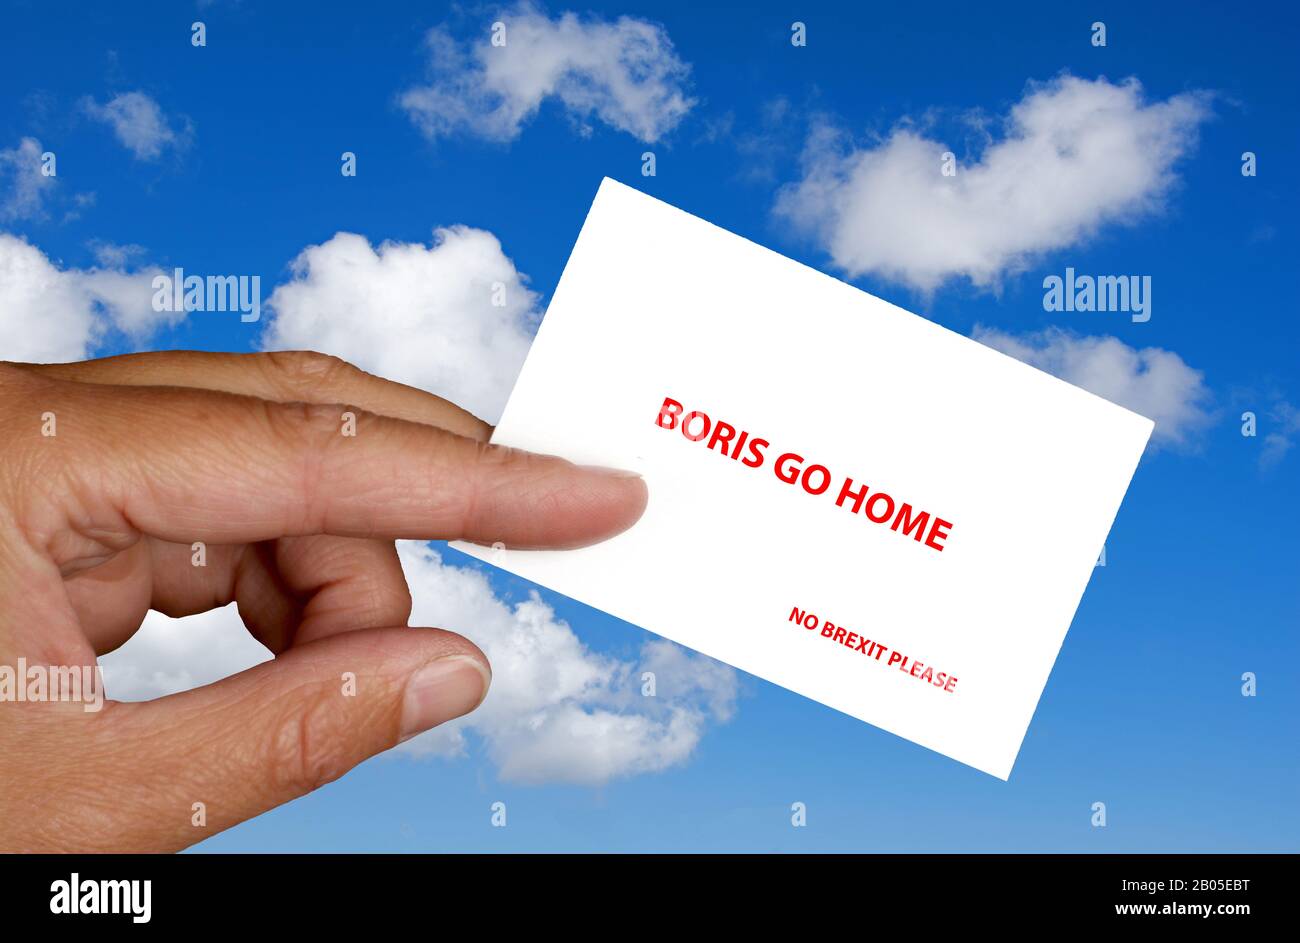 hand against blue sky holding card lettering Boris go home, No brexit please, Germany Stock Photo